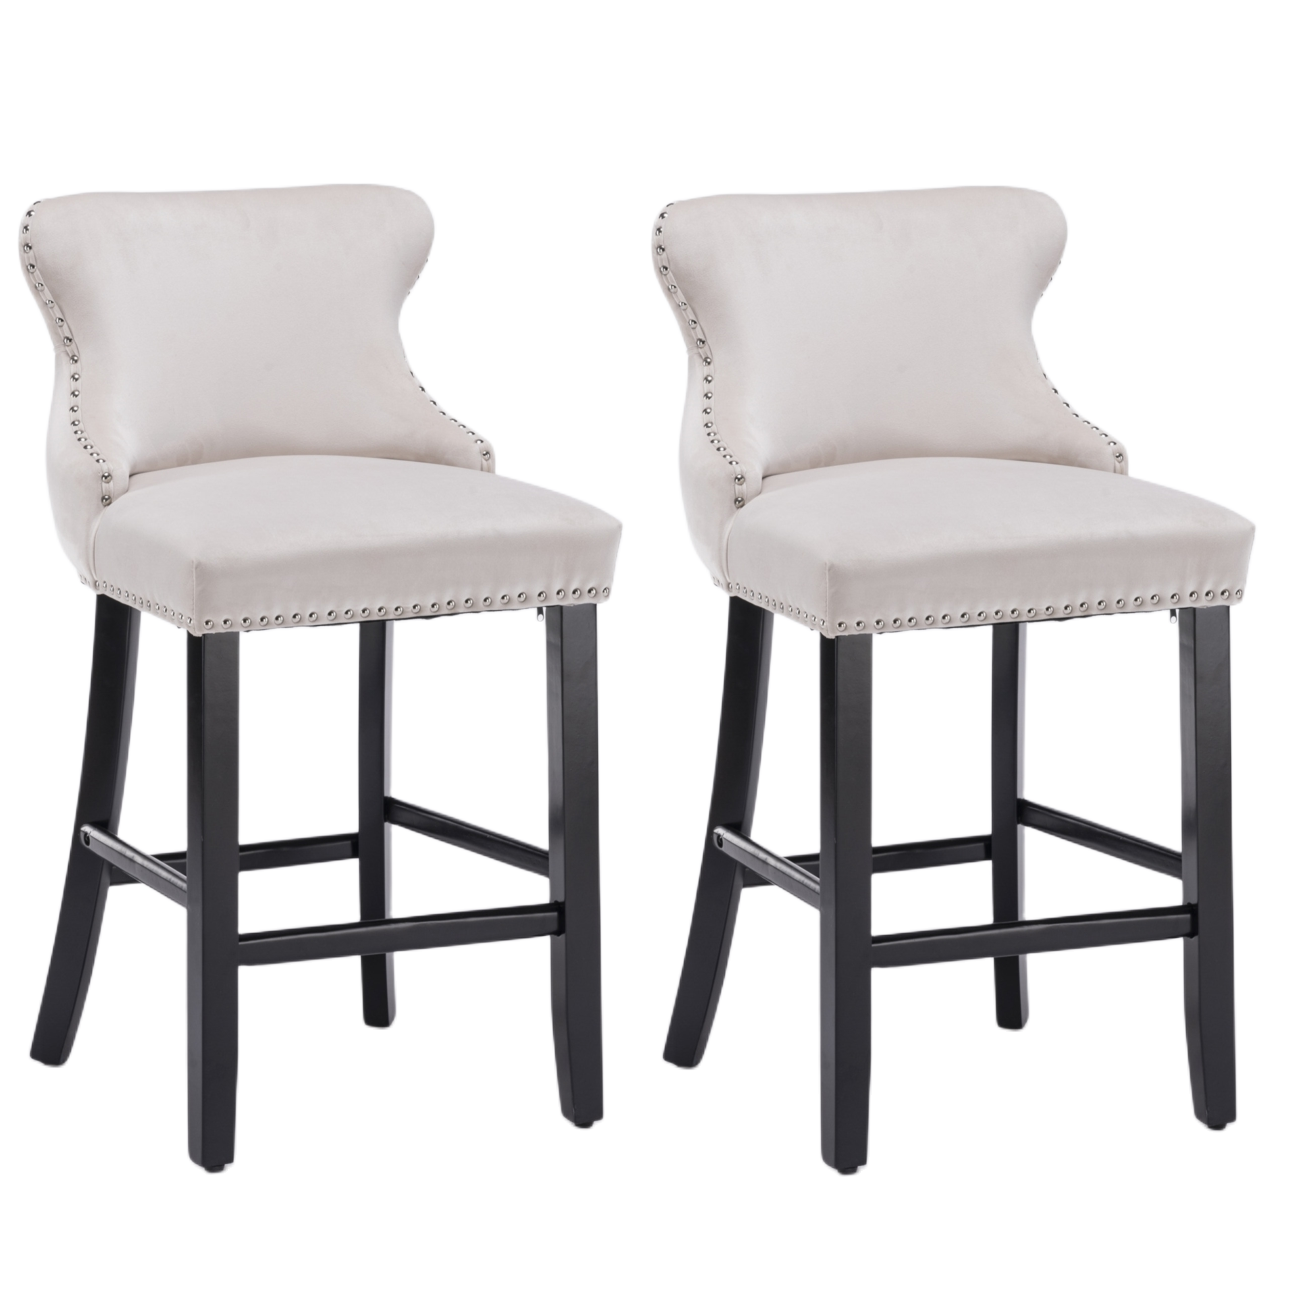 2 x Velvet Upholstered Button Tufted Bar Stools with Wood Legs and Studs-Beige